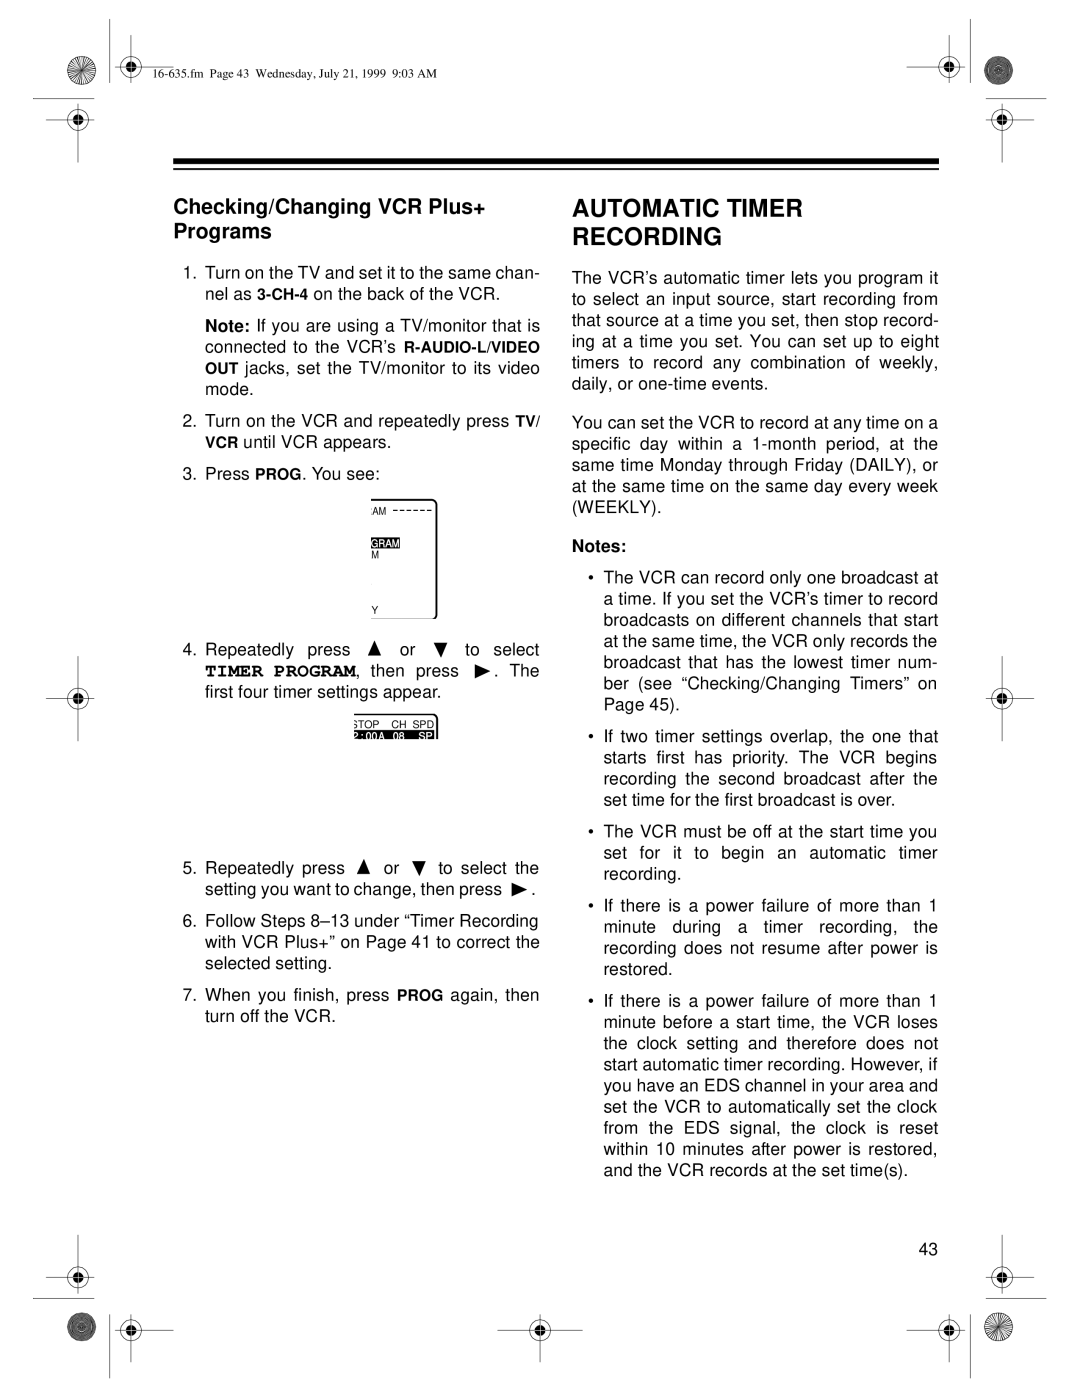 Radio Shack 66 owner manual Recording, Automatic Timer, Checking/Changing VCR Plus+, Programs 